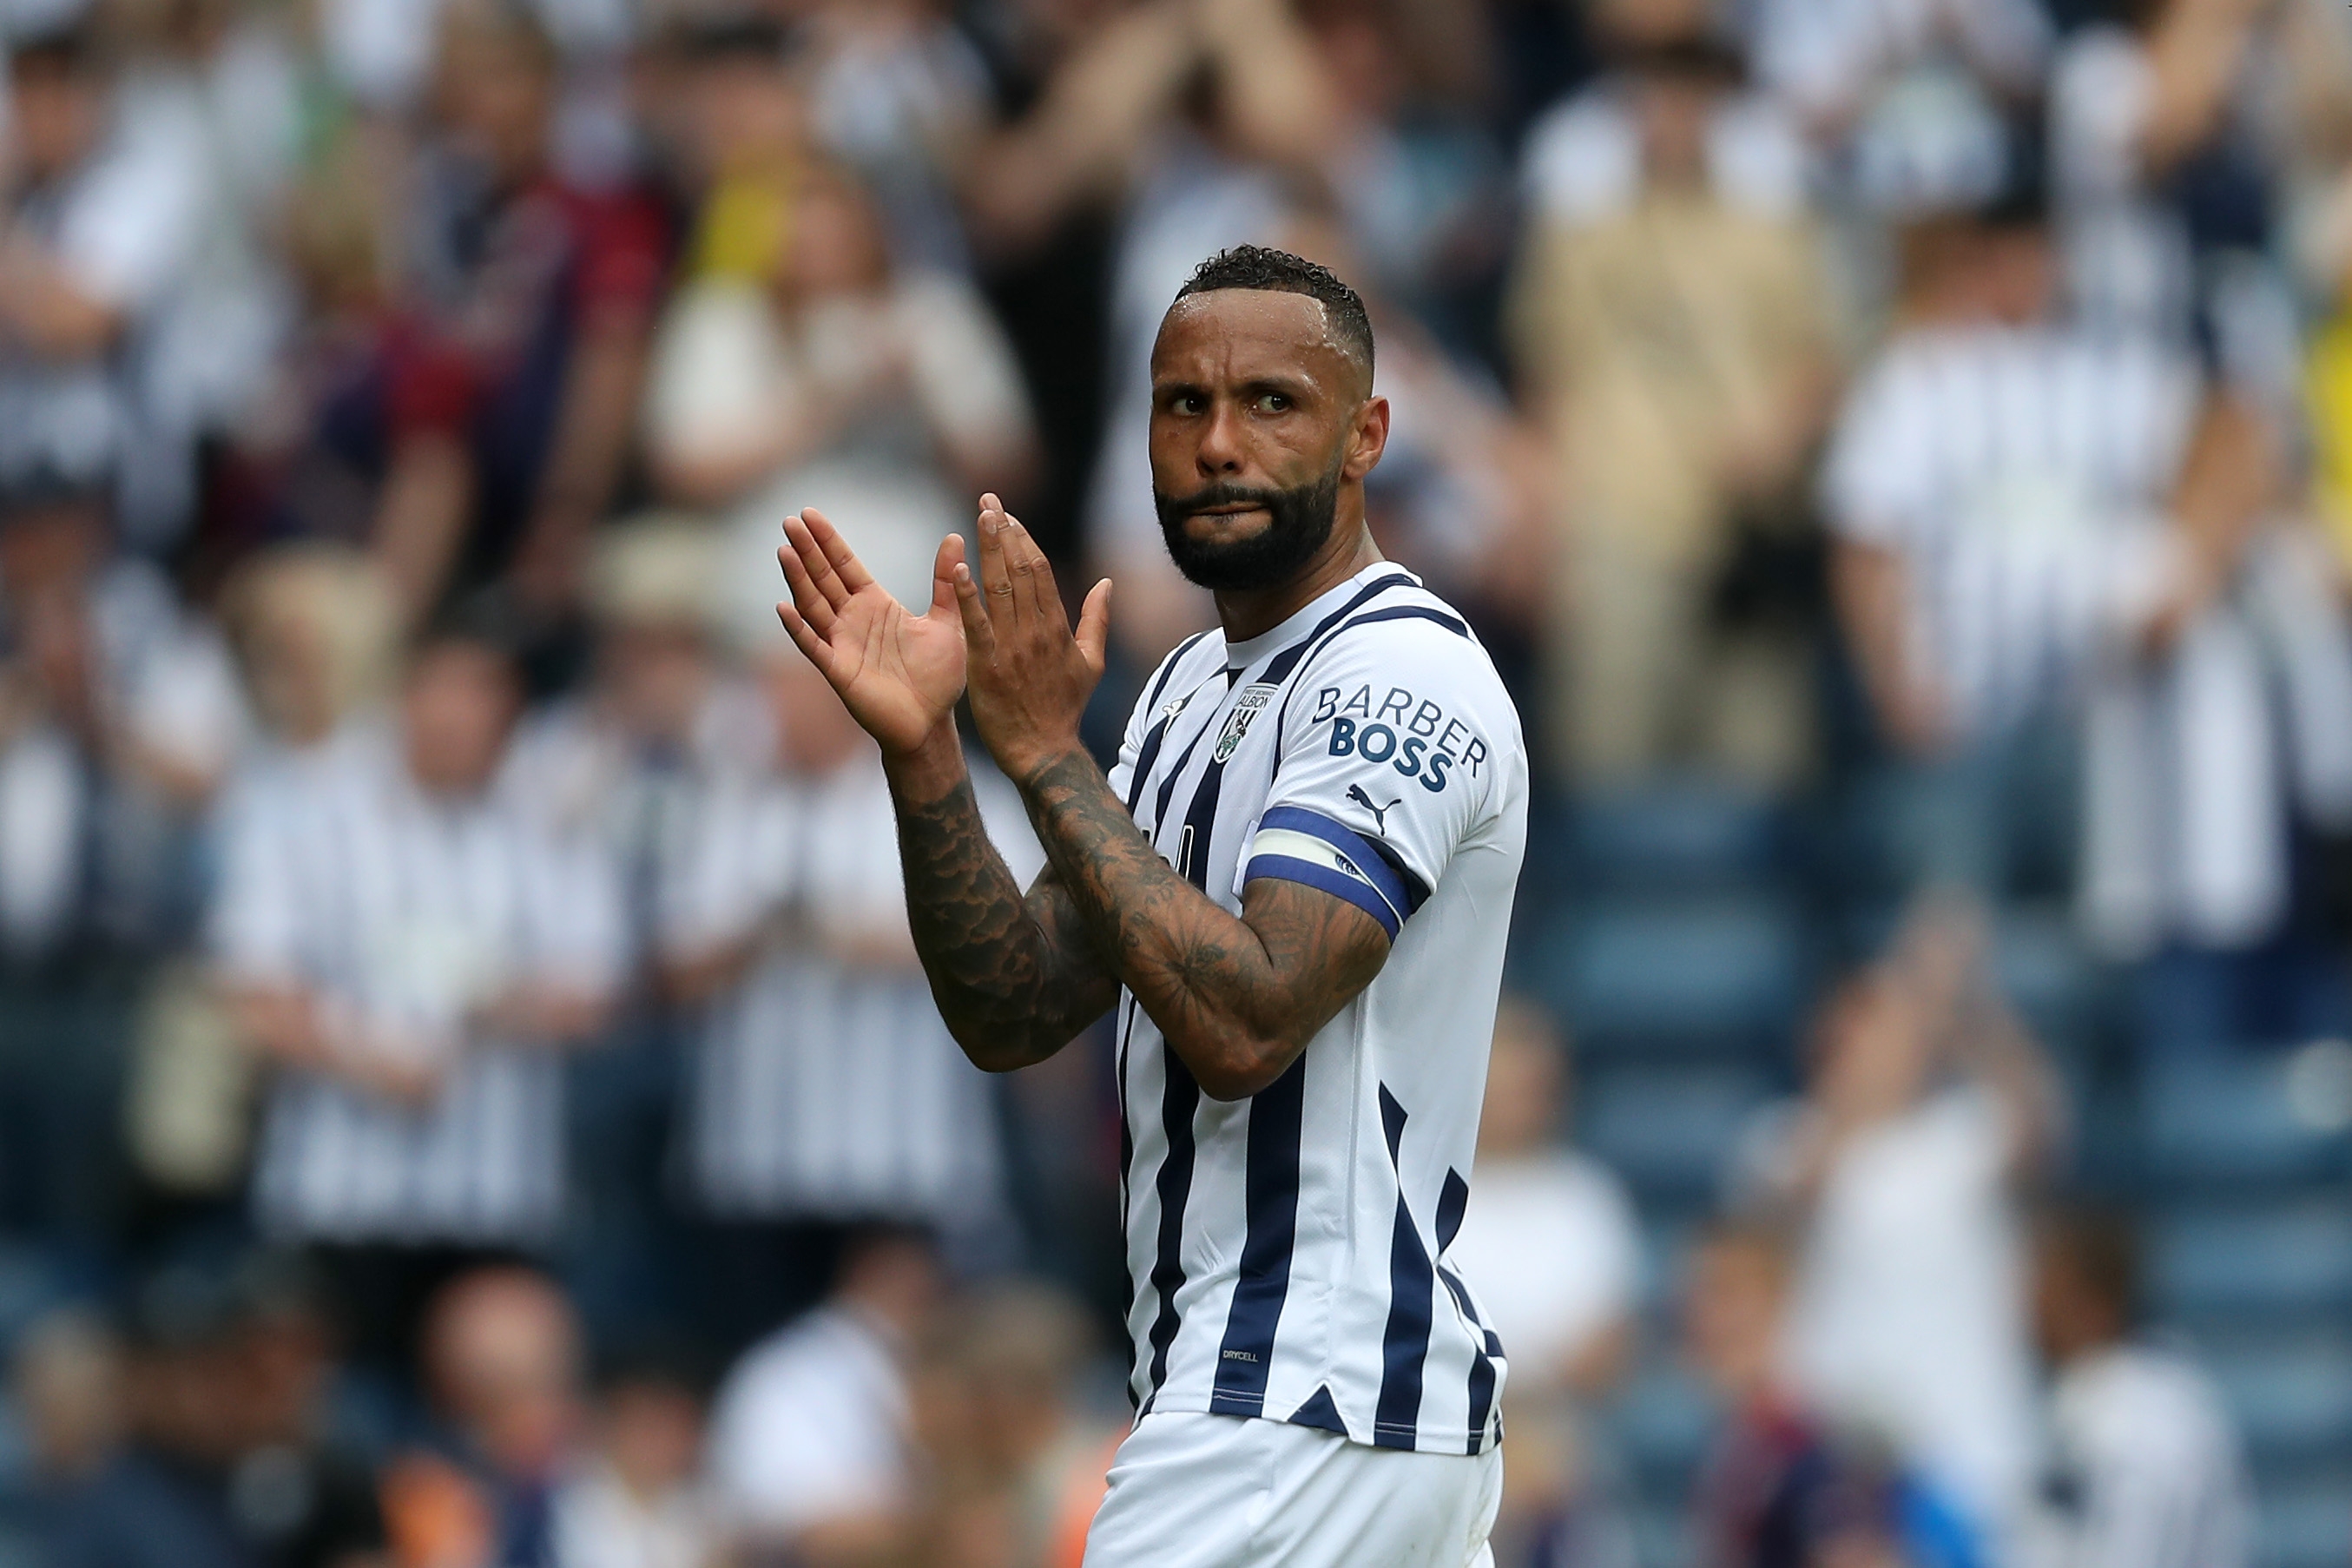 Kyle Bartley applauding supporters after the full-time whistle against Southampton